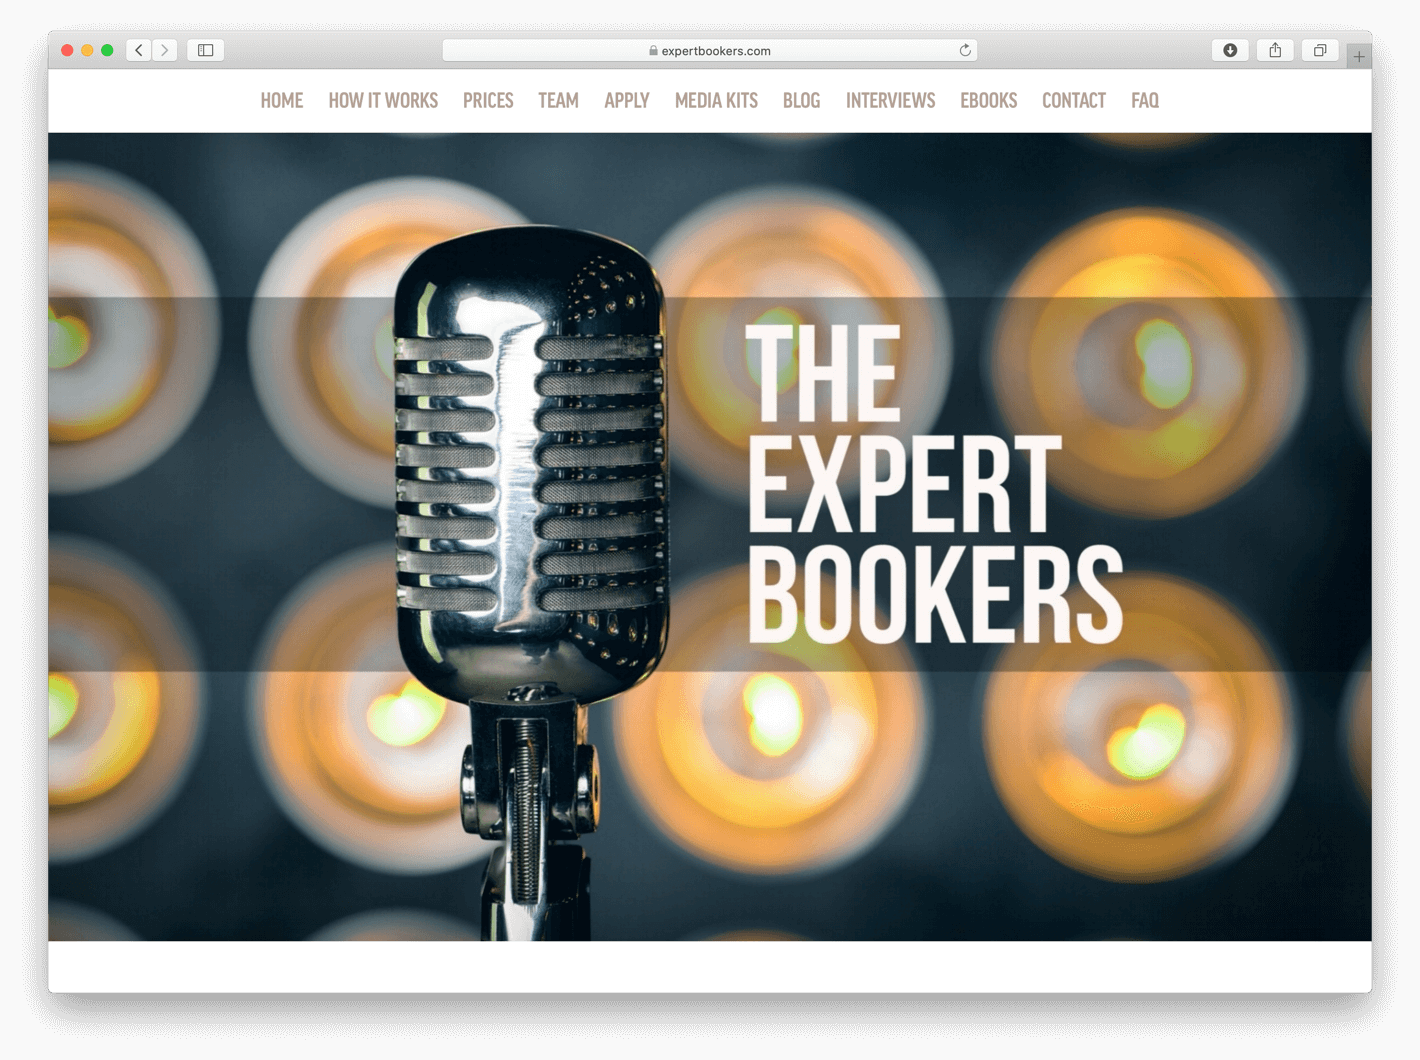 The Expert Bookers homepage